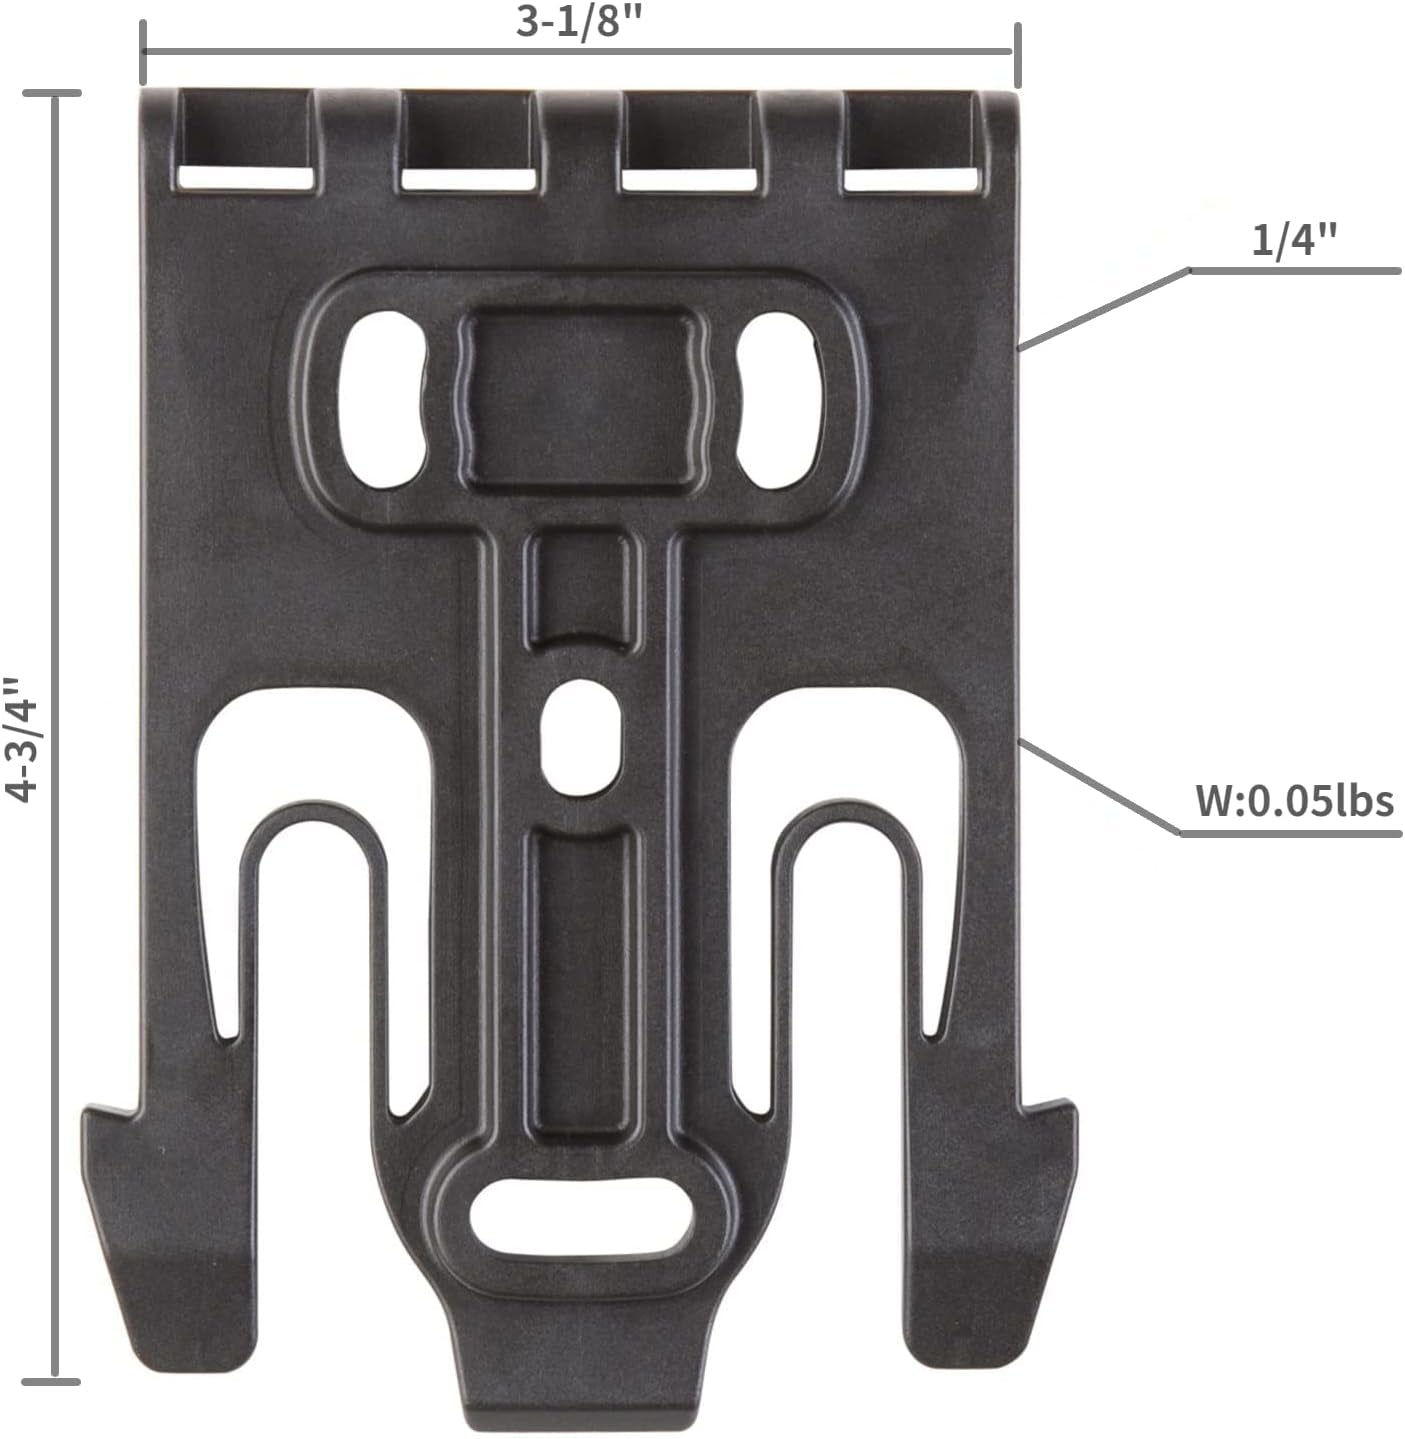 2 Pack QLS Kit, Quick Locking System Kit with Qls 19 and Qls22L for Quick Connect Drop Leg Holster and Mid-Ride Universal Belt Loop